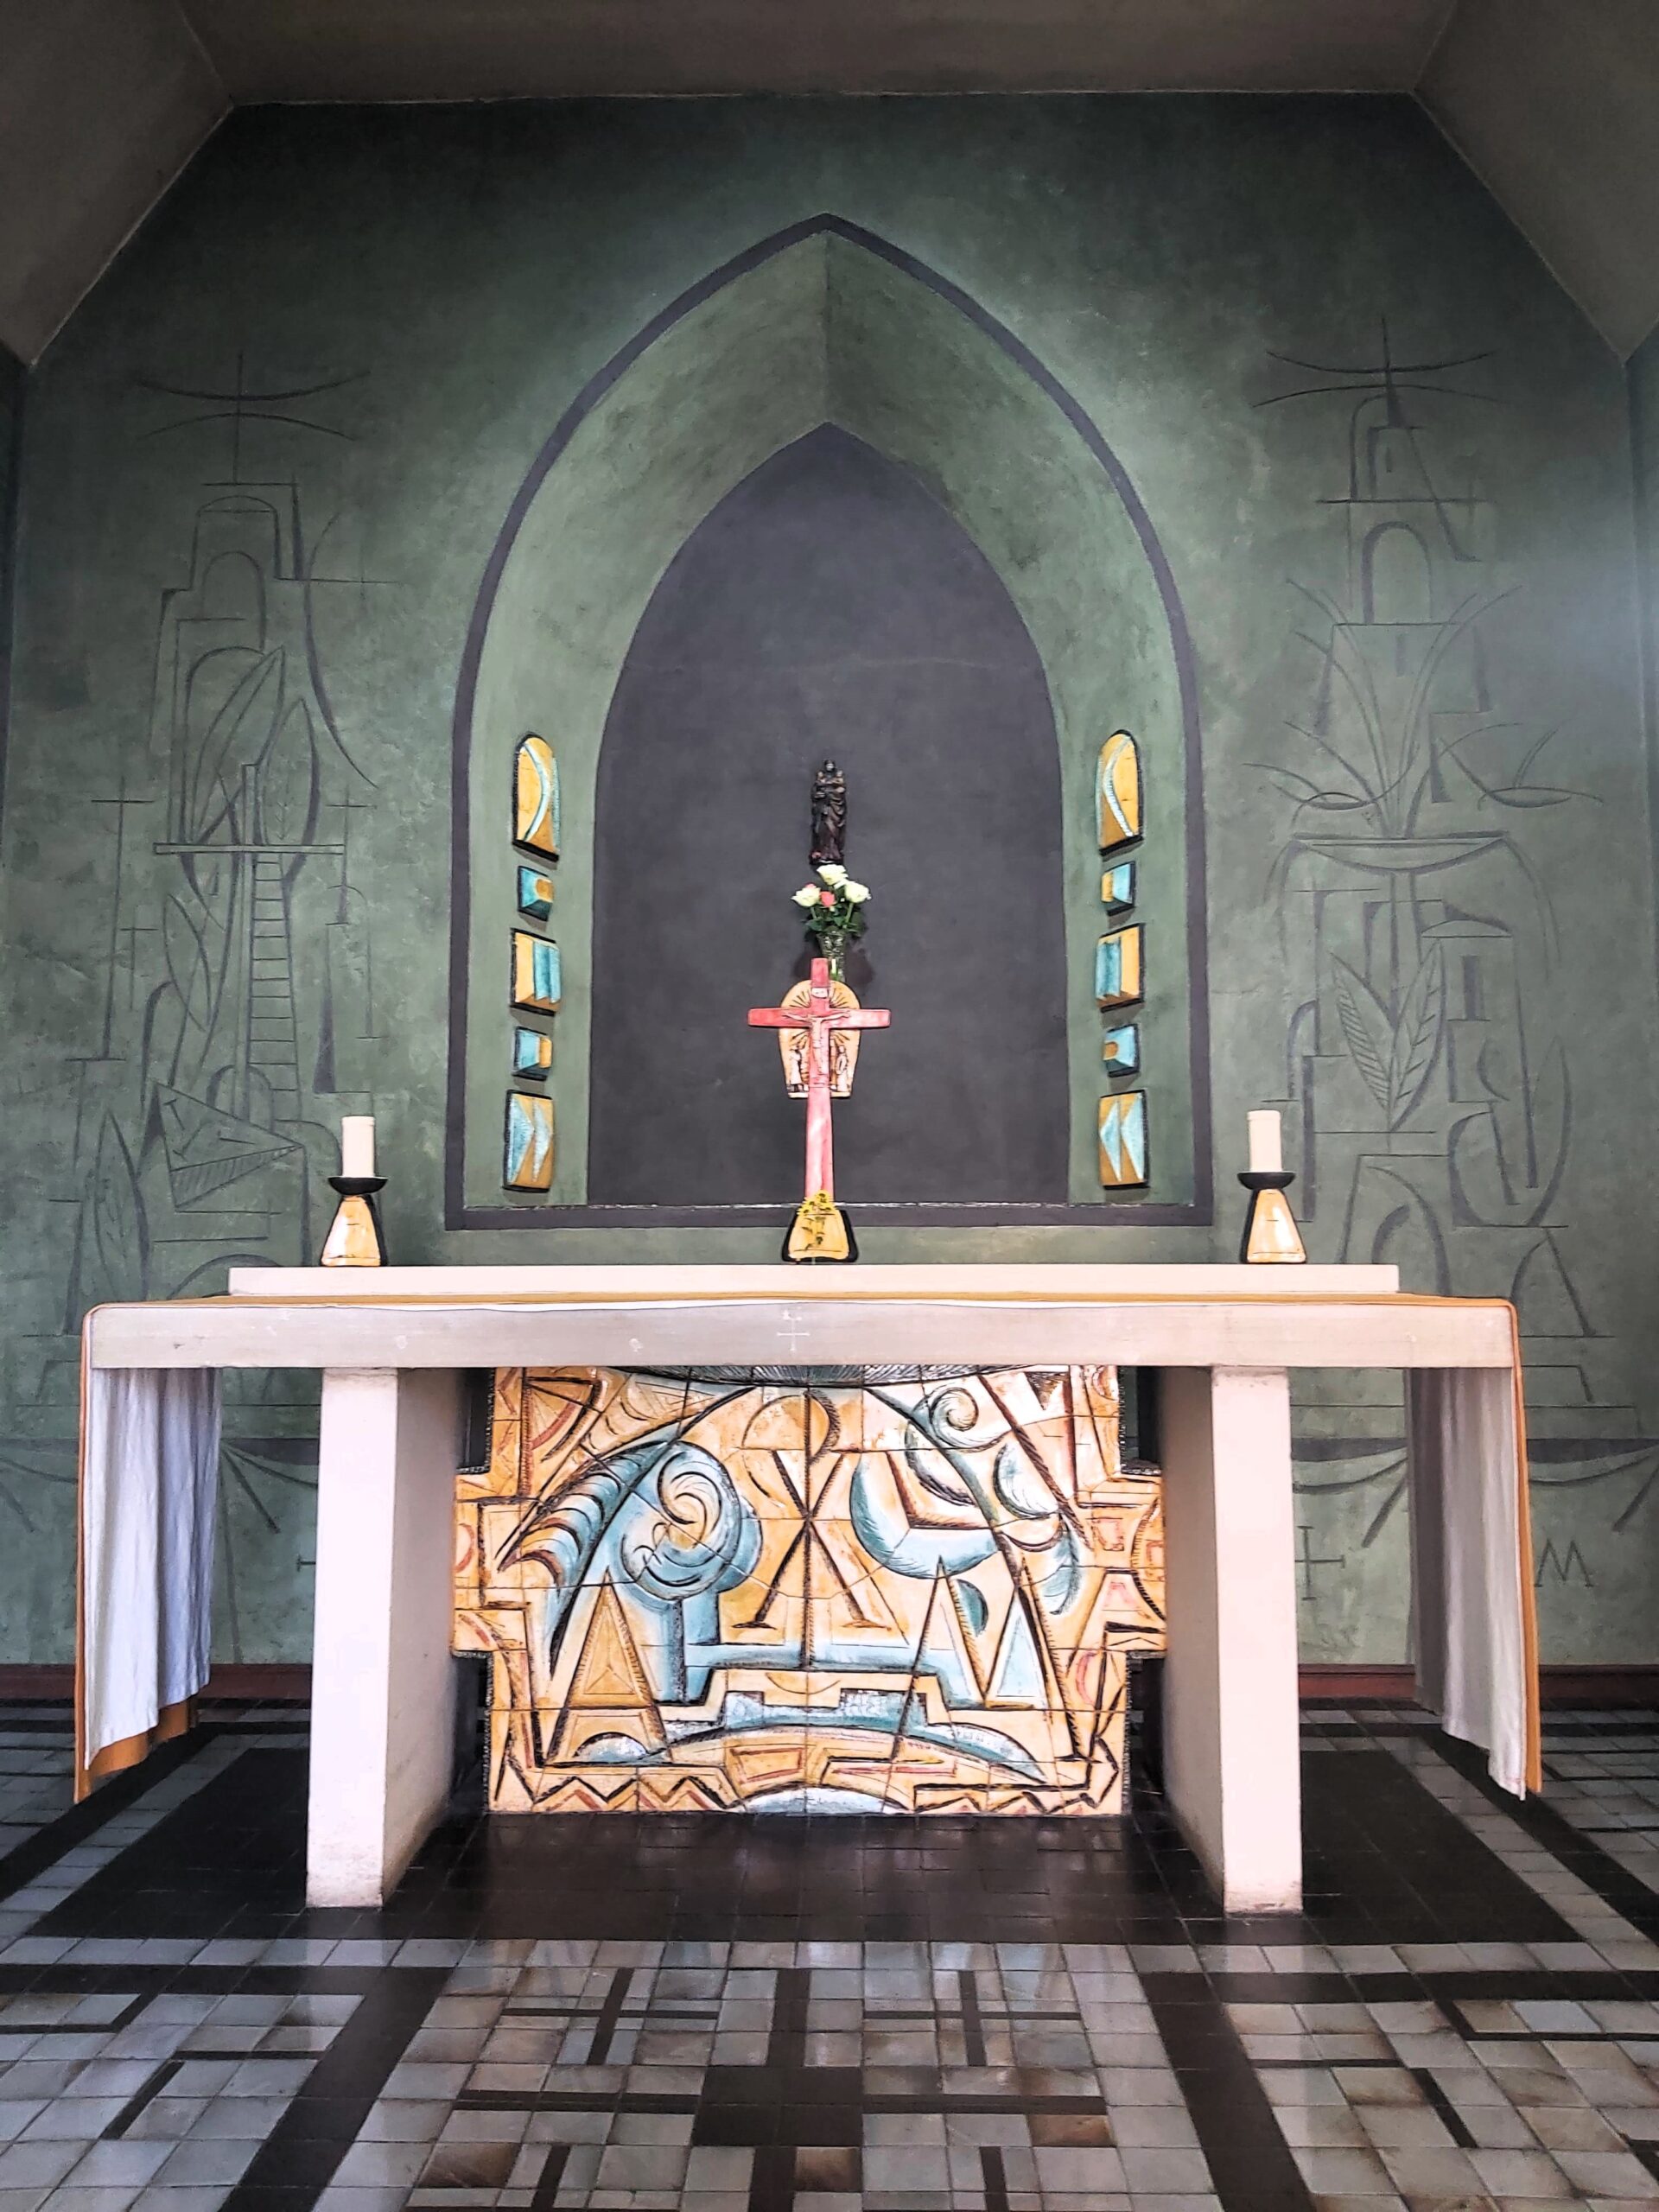 A modern art style altar in The Friars Aylesford Priory, Kent, England